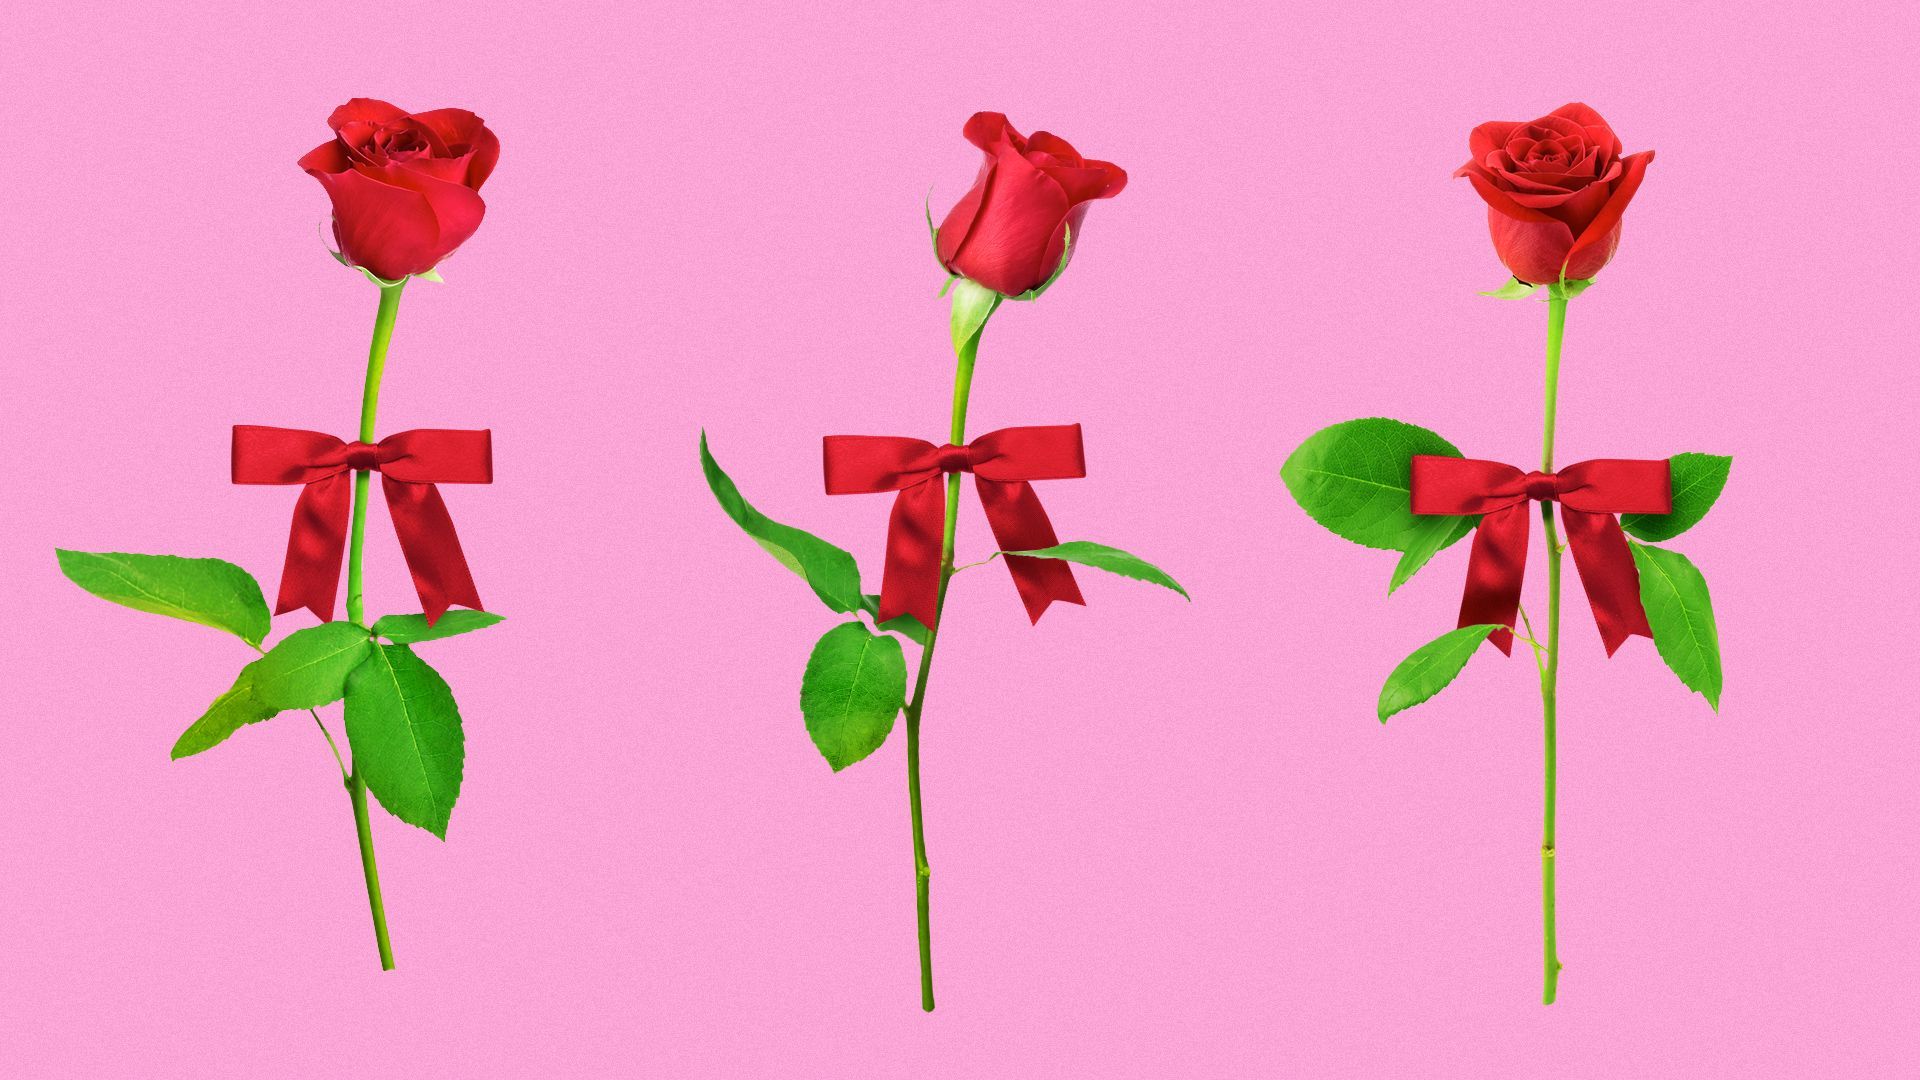 Illustration of three single red roses, each with a red ribbon tied in a bow. 